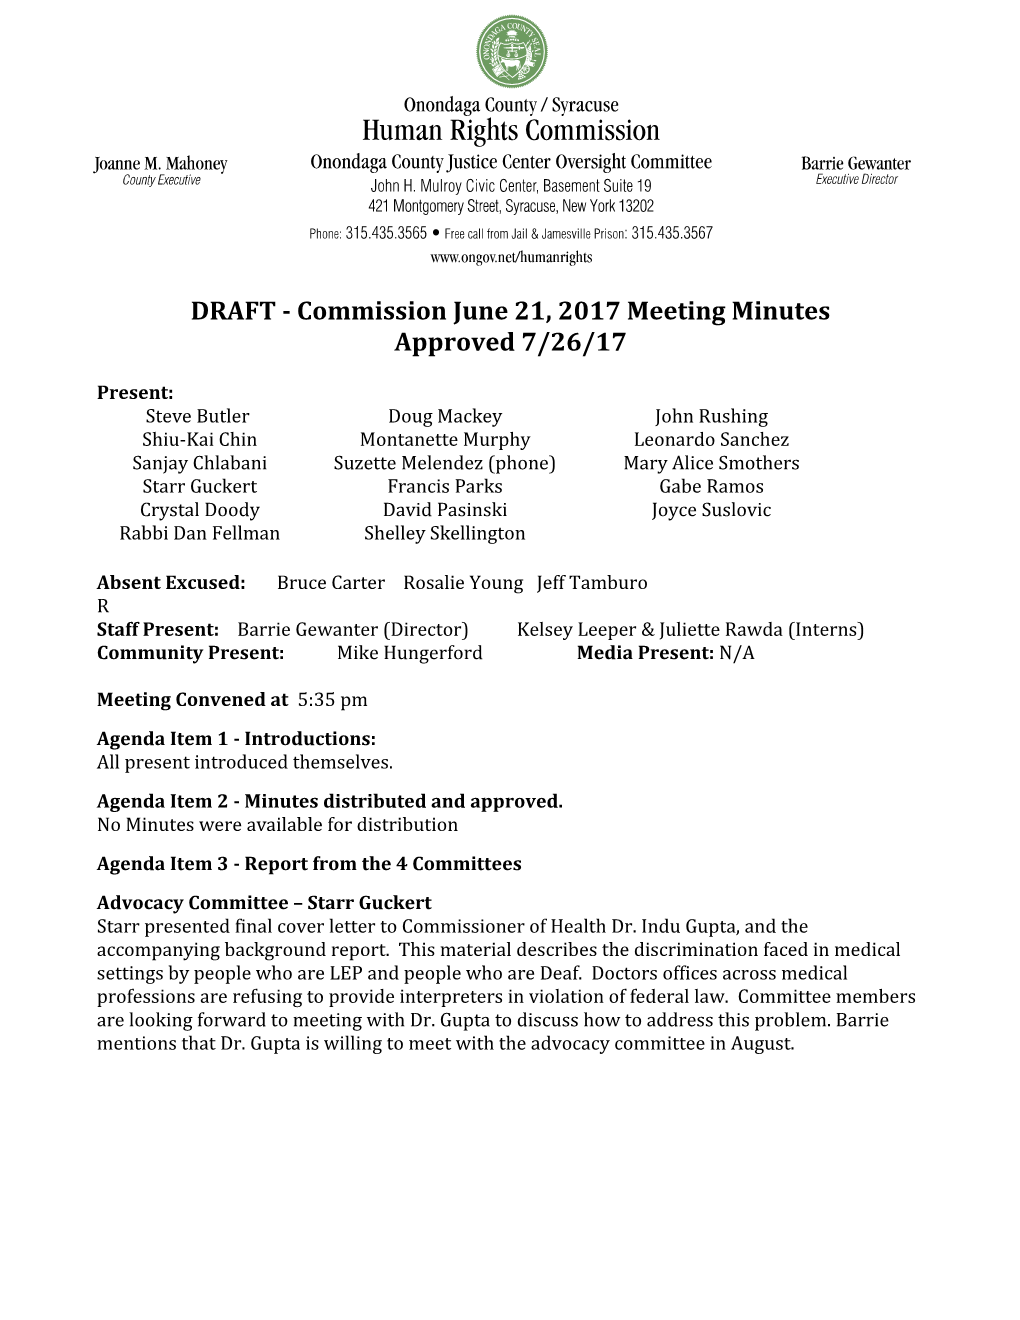 DRAFT - Commission June 21, 2017 Meeting Minutes